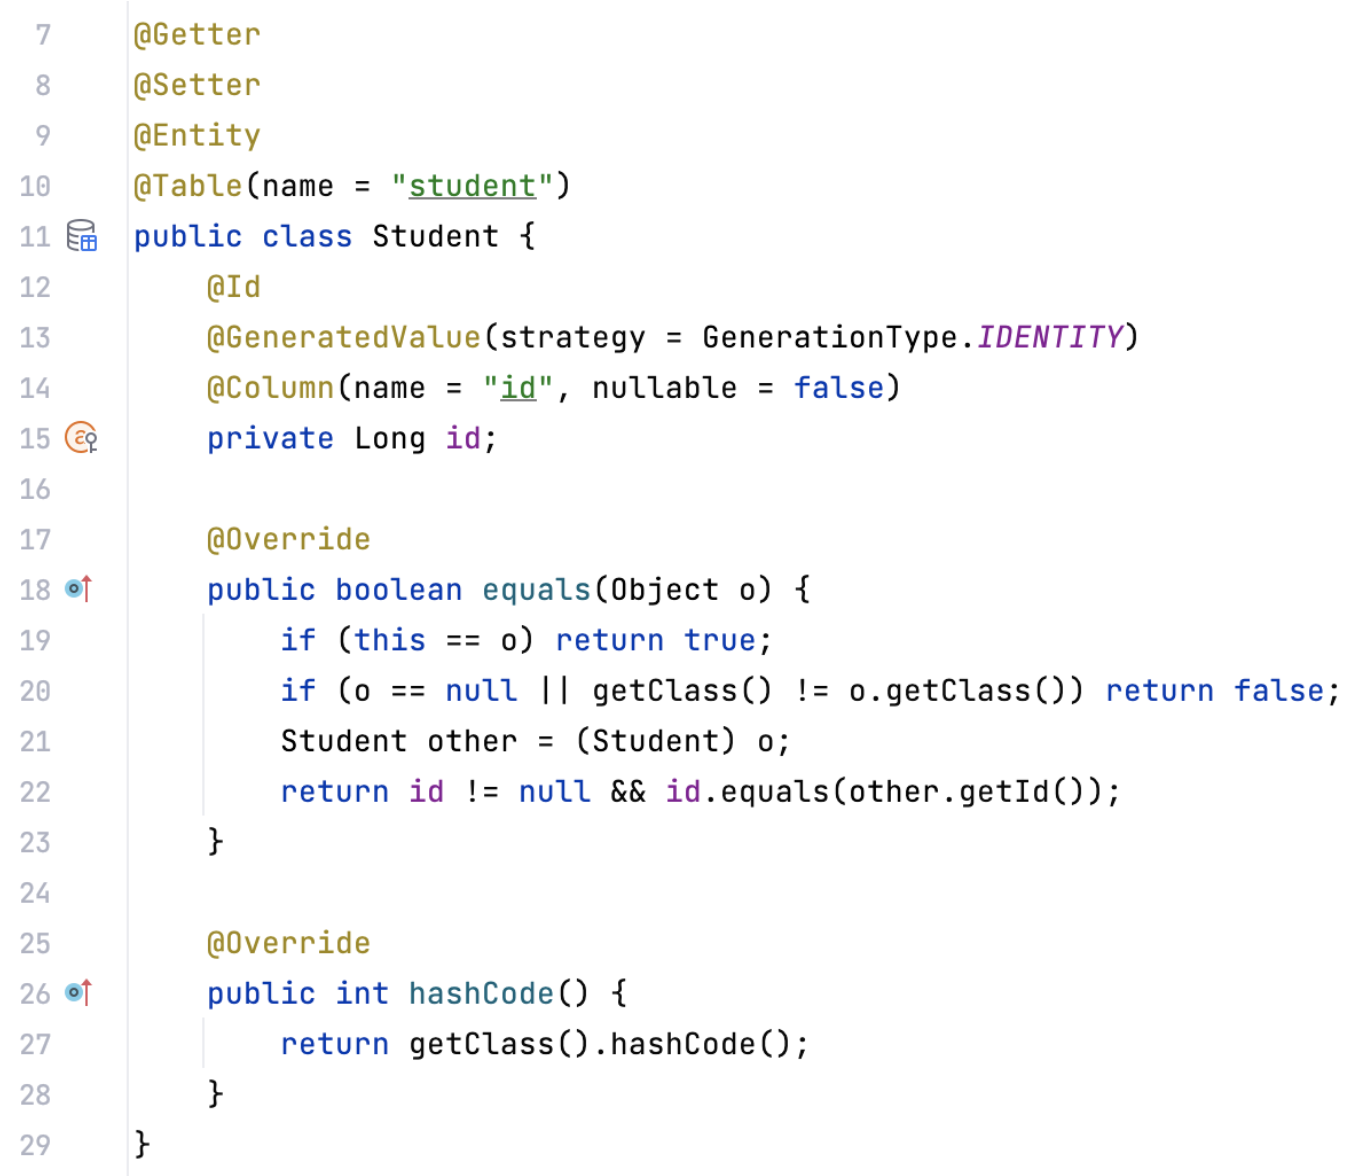 java - How to extend or implement classes? - Stack Overflow